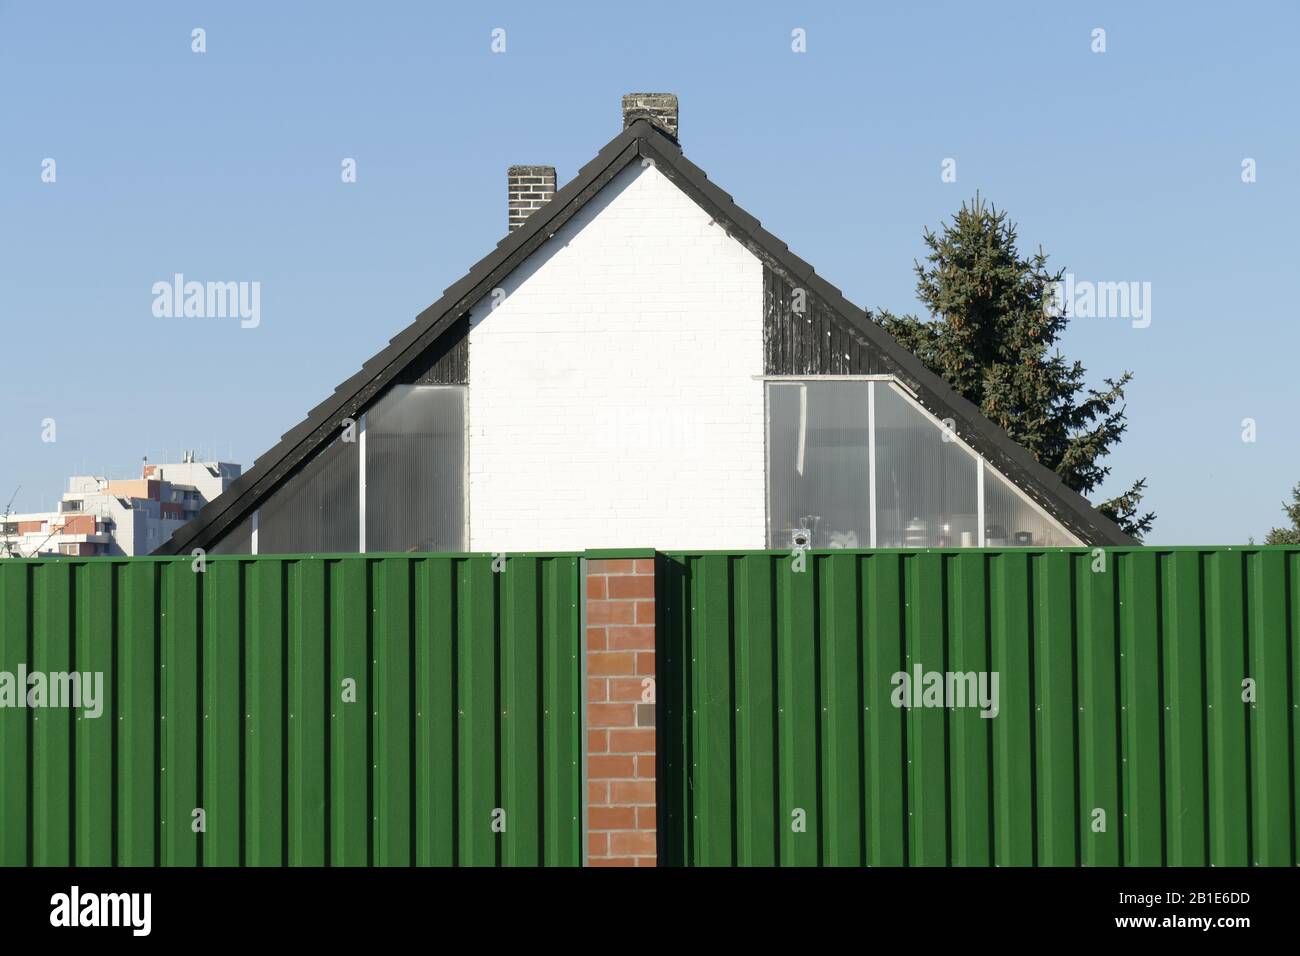 Noise barrier on a street with residential buildings, Bremen, Germany Stock Photo